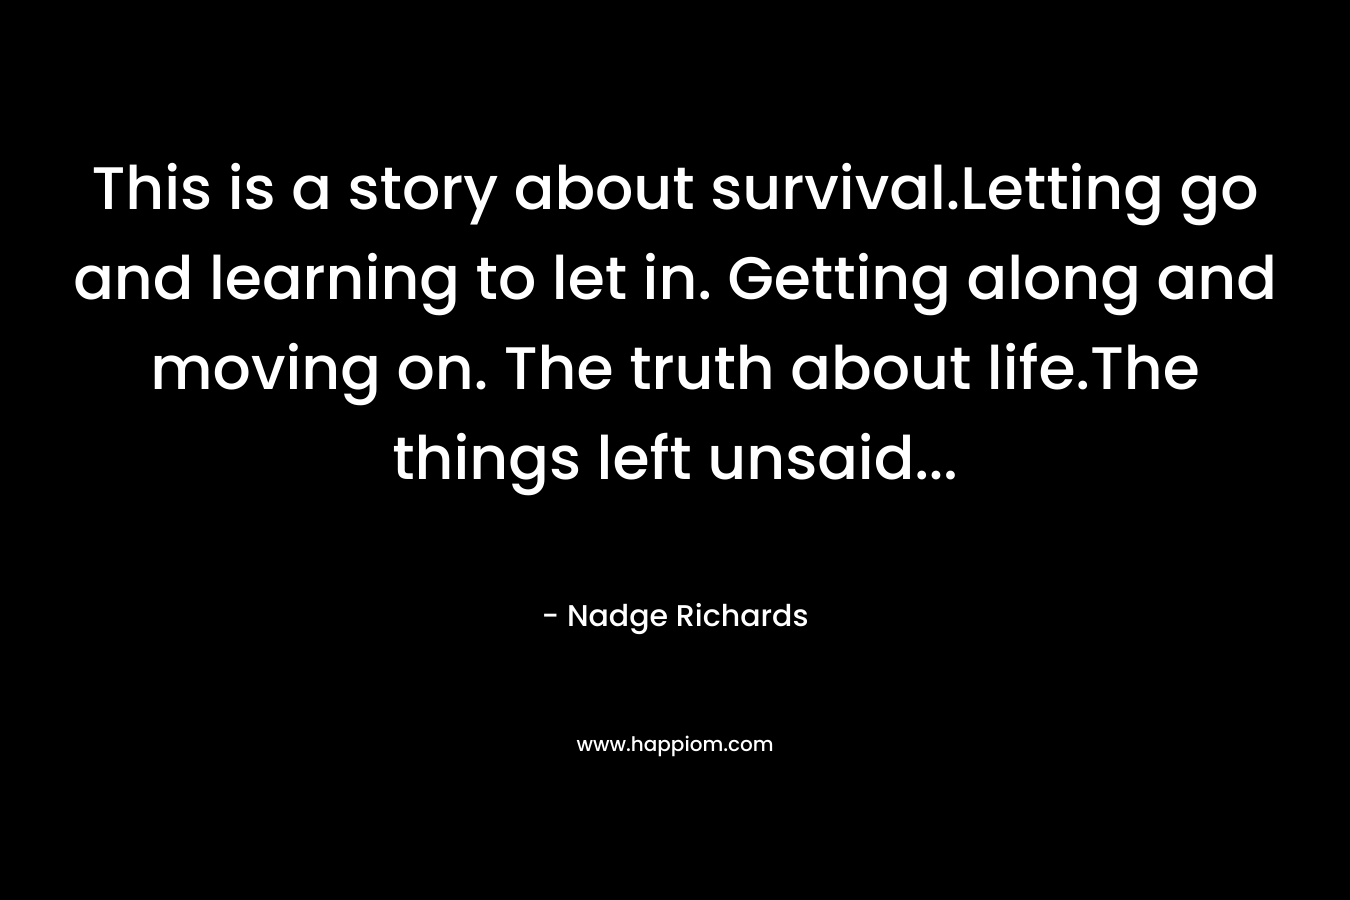 This is a story about survival.Letting go and learning to let in. Getting along and moving on. The truth about life.The things left unsaid… – Nadge Richards